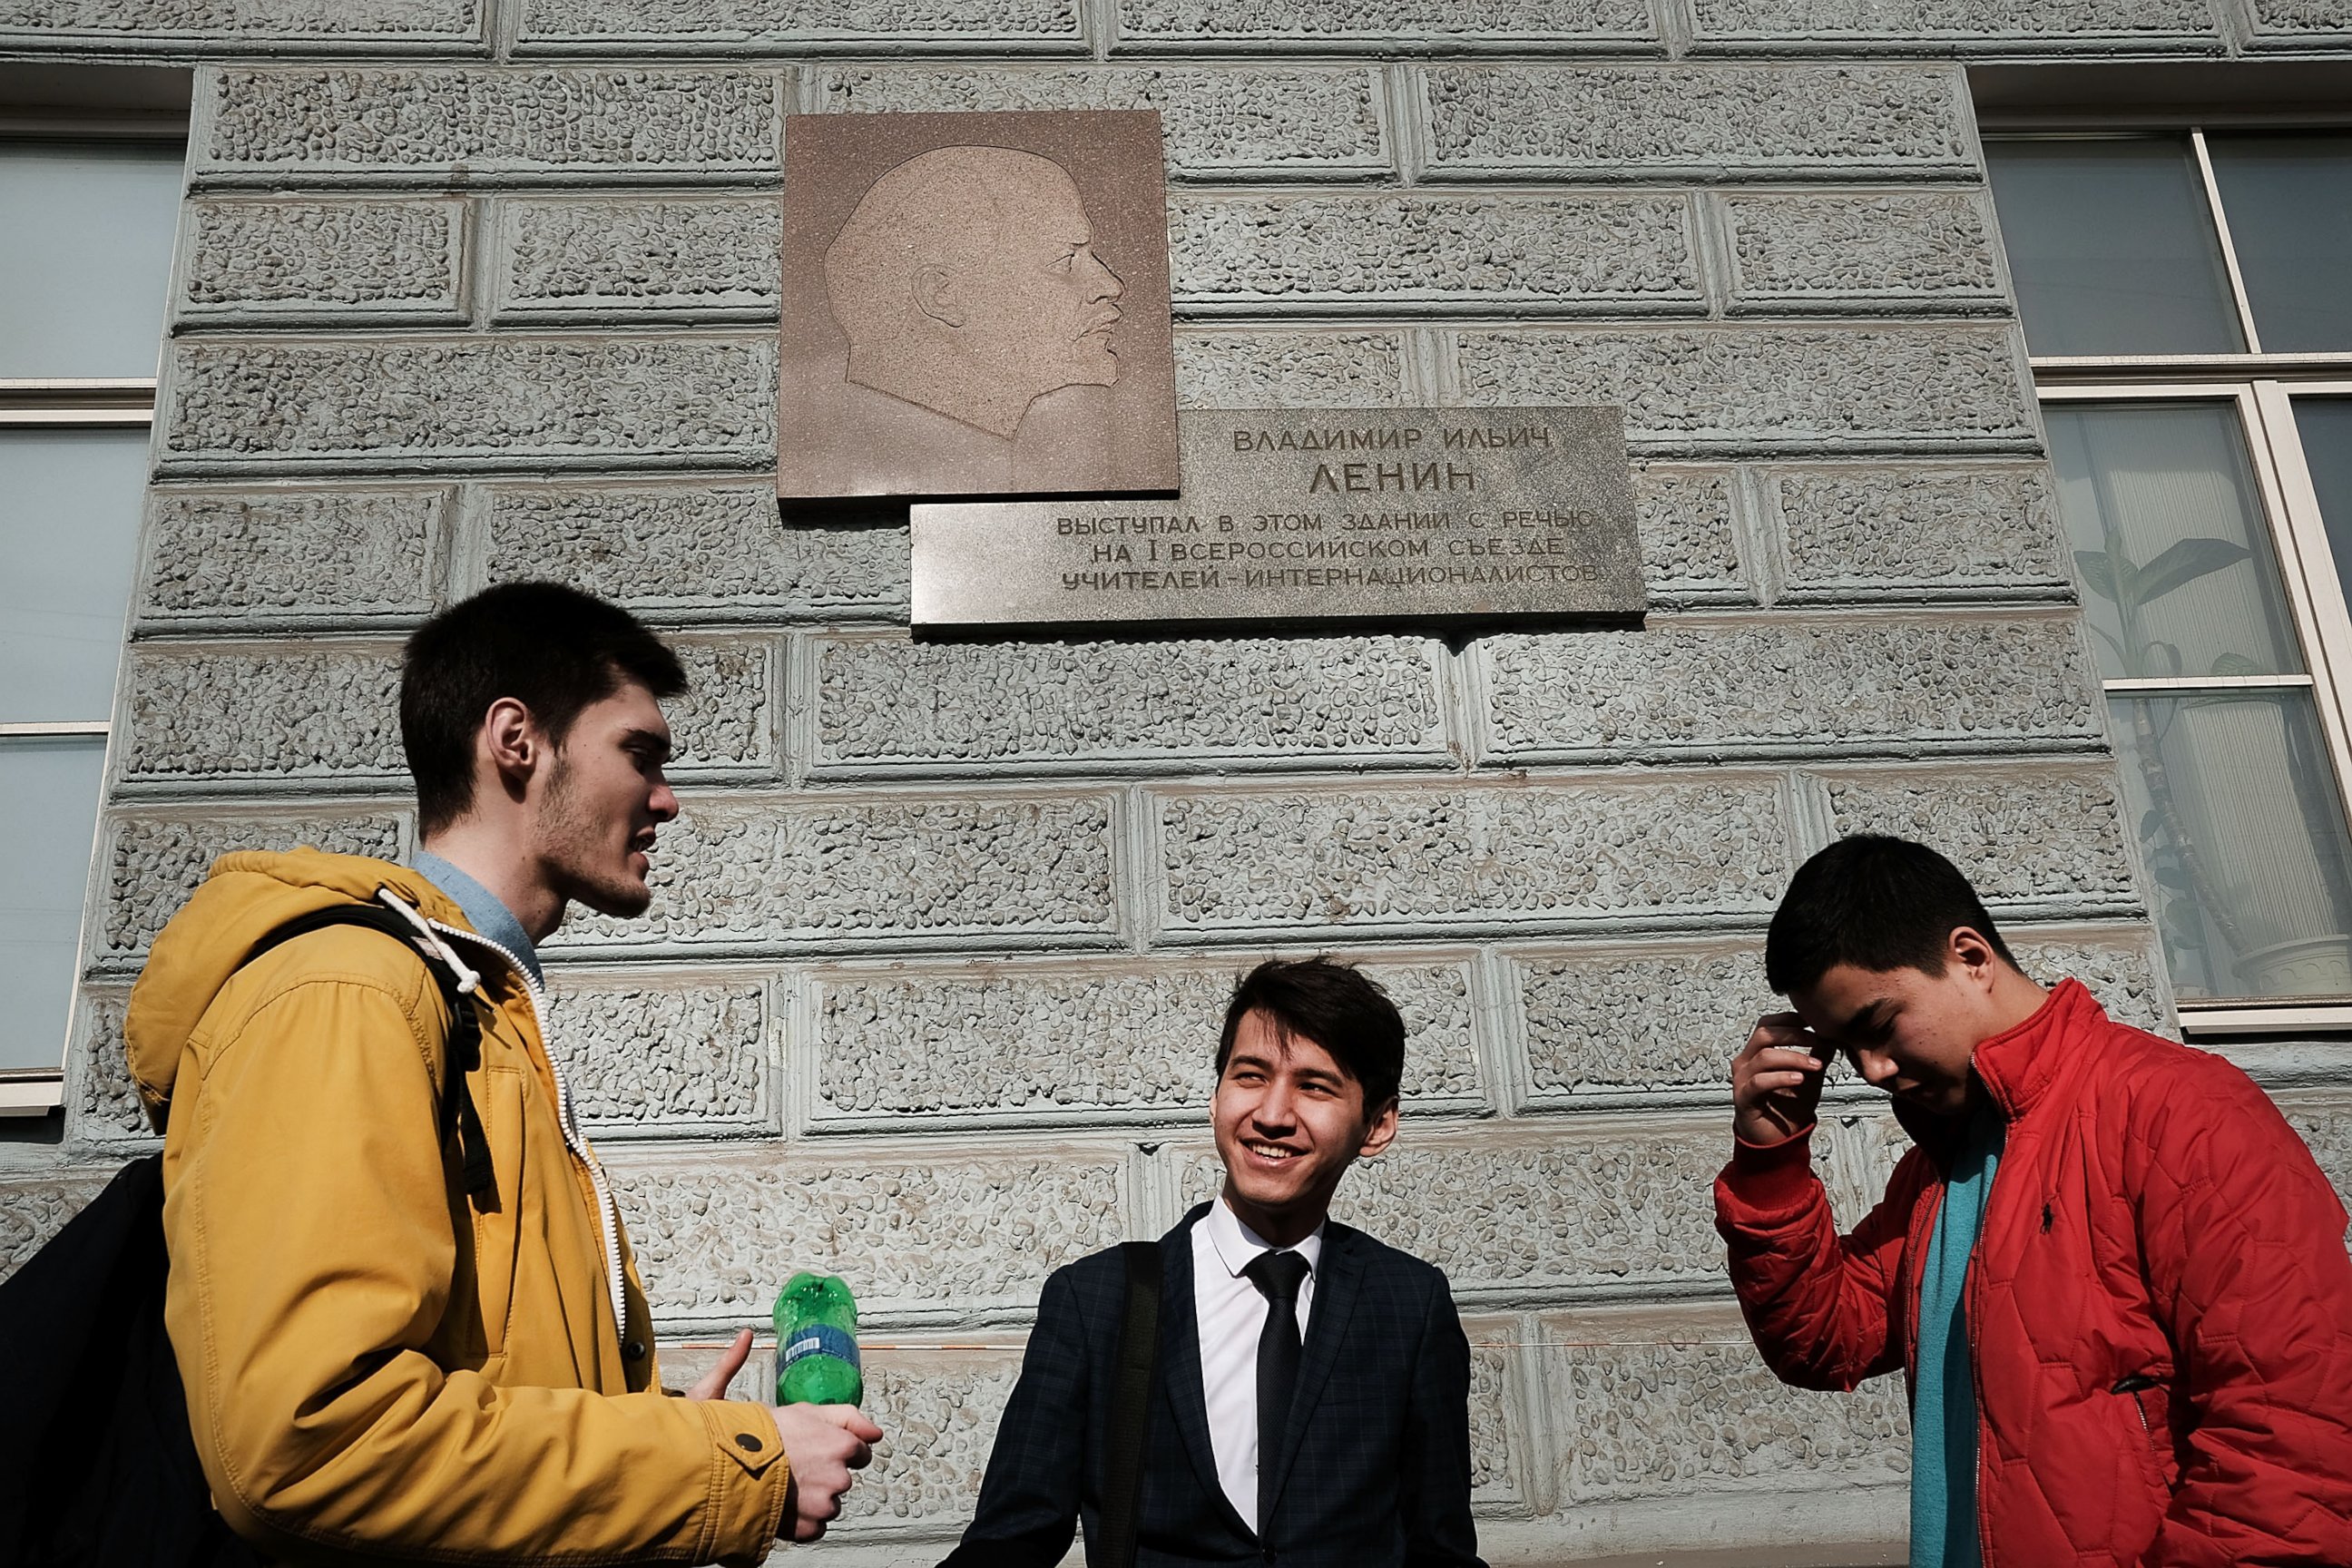 PHOTO: Students stand under a picture of Vladimir Lenin in downtown Moscow on March 9, 2017.